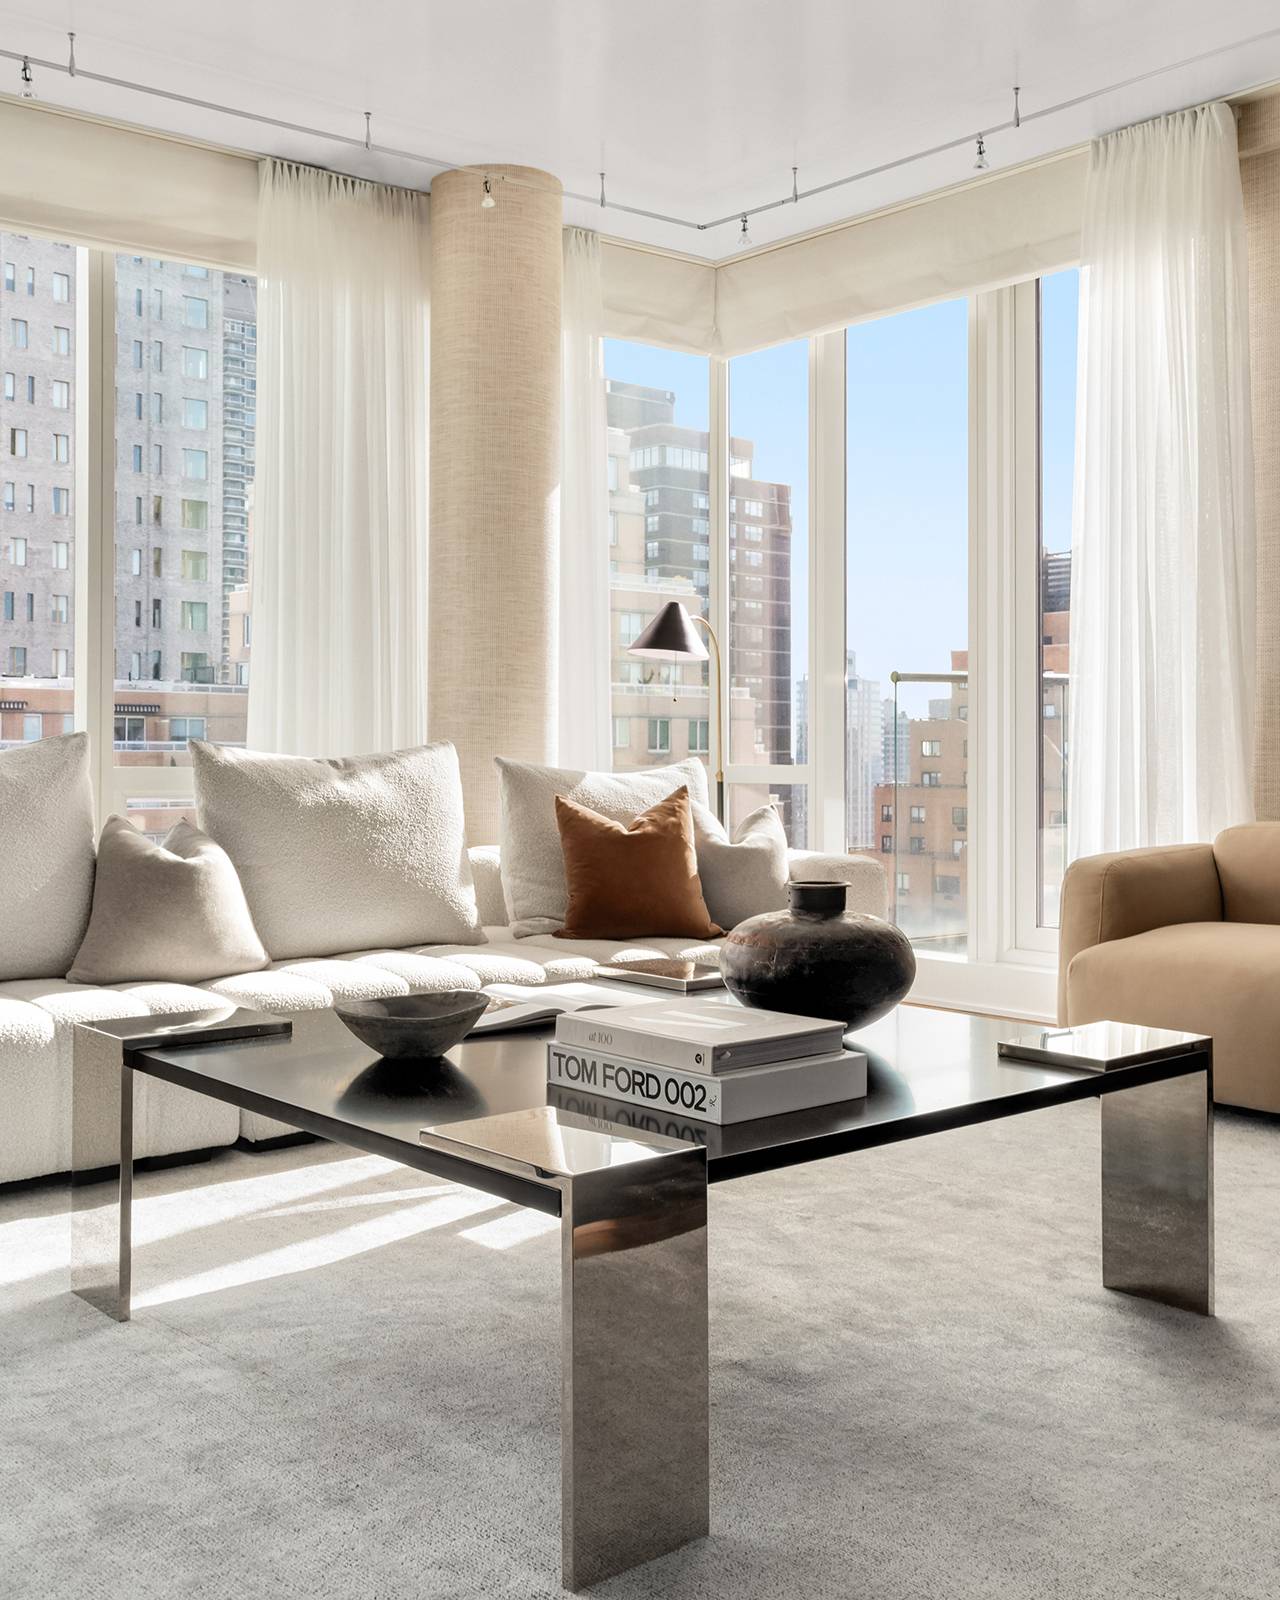 Designed with the highest standards of luxury and convenience in mind, this spectacular, 7, 500 square foot duplex features 5 bedrooms, 51 2 bathrooms and a sprawling rooftop terrace that ...